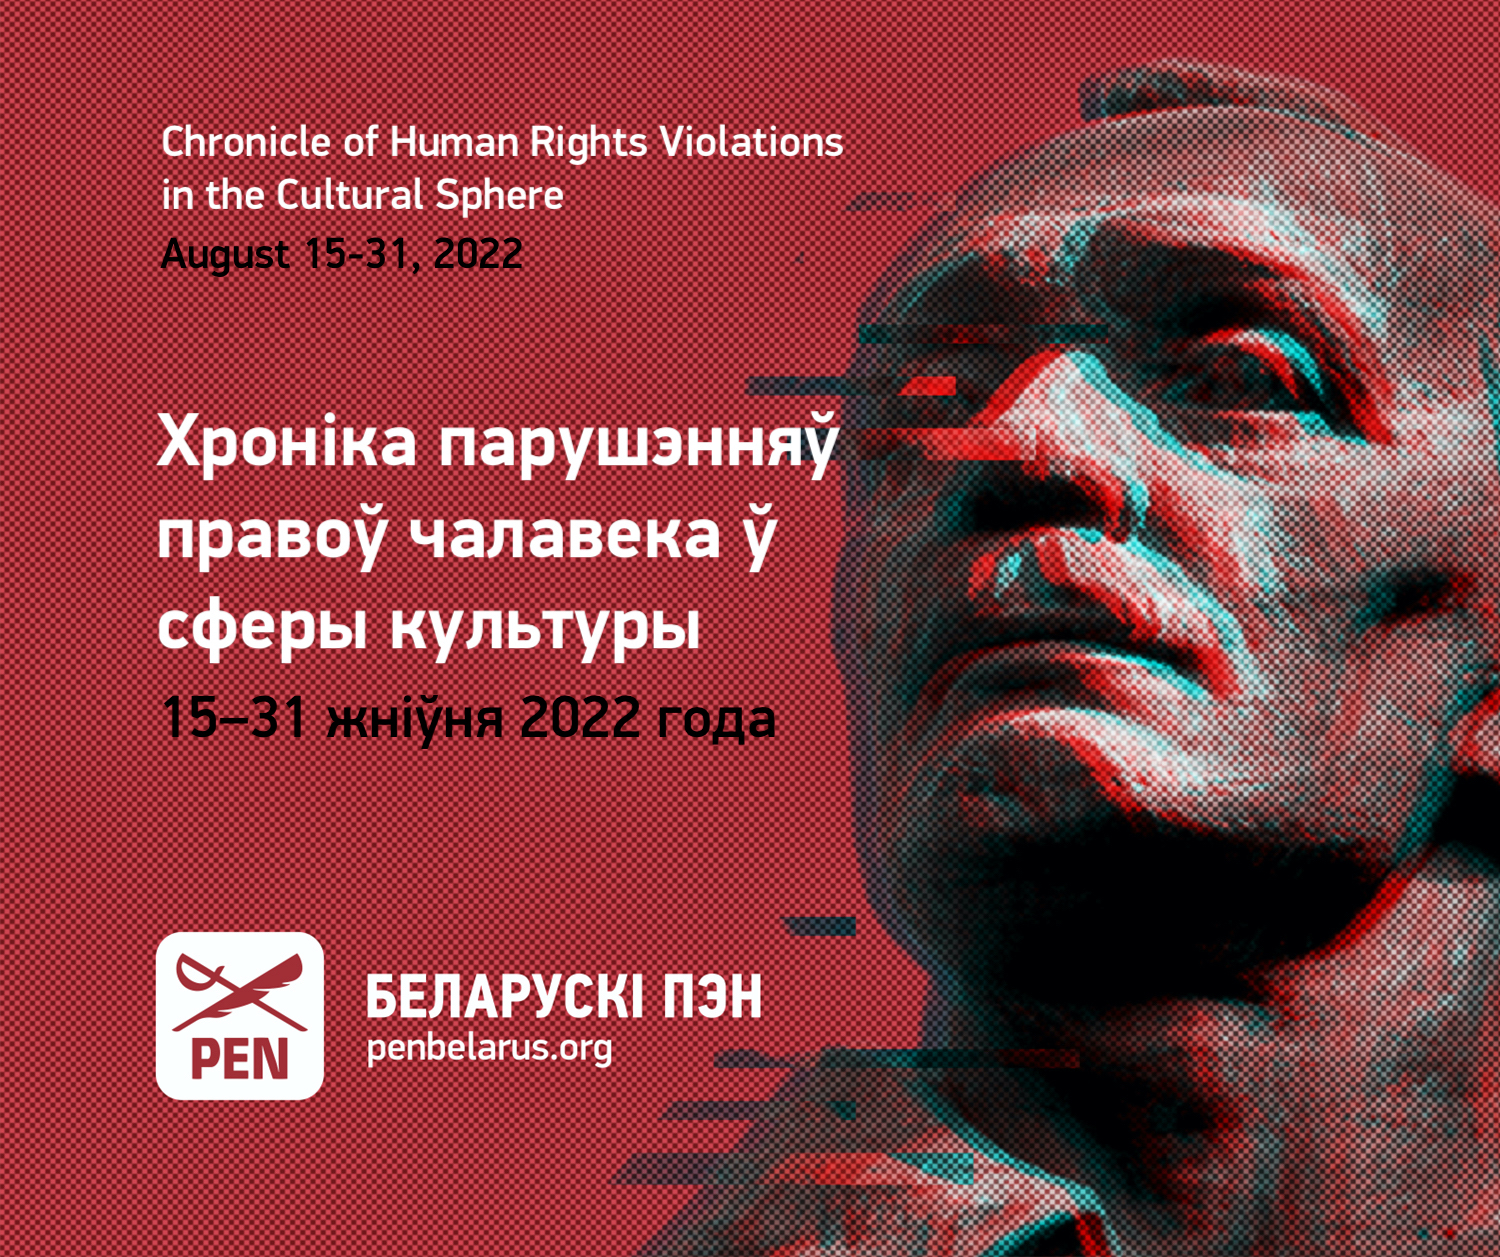 Chronicle of Human Rights Violations in the Cultural Sphere (August 15-31, 2022)